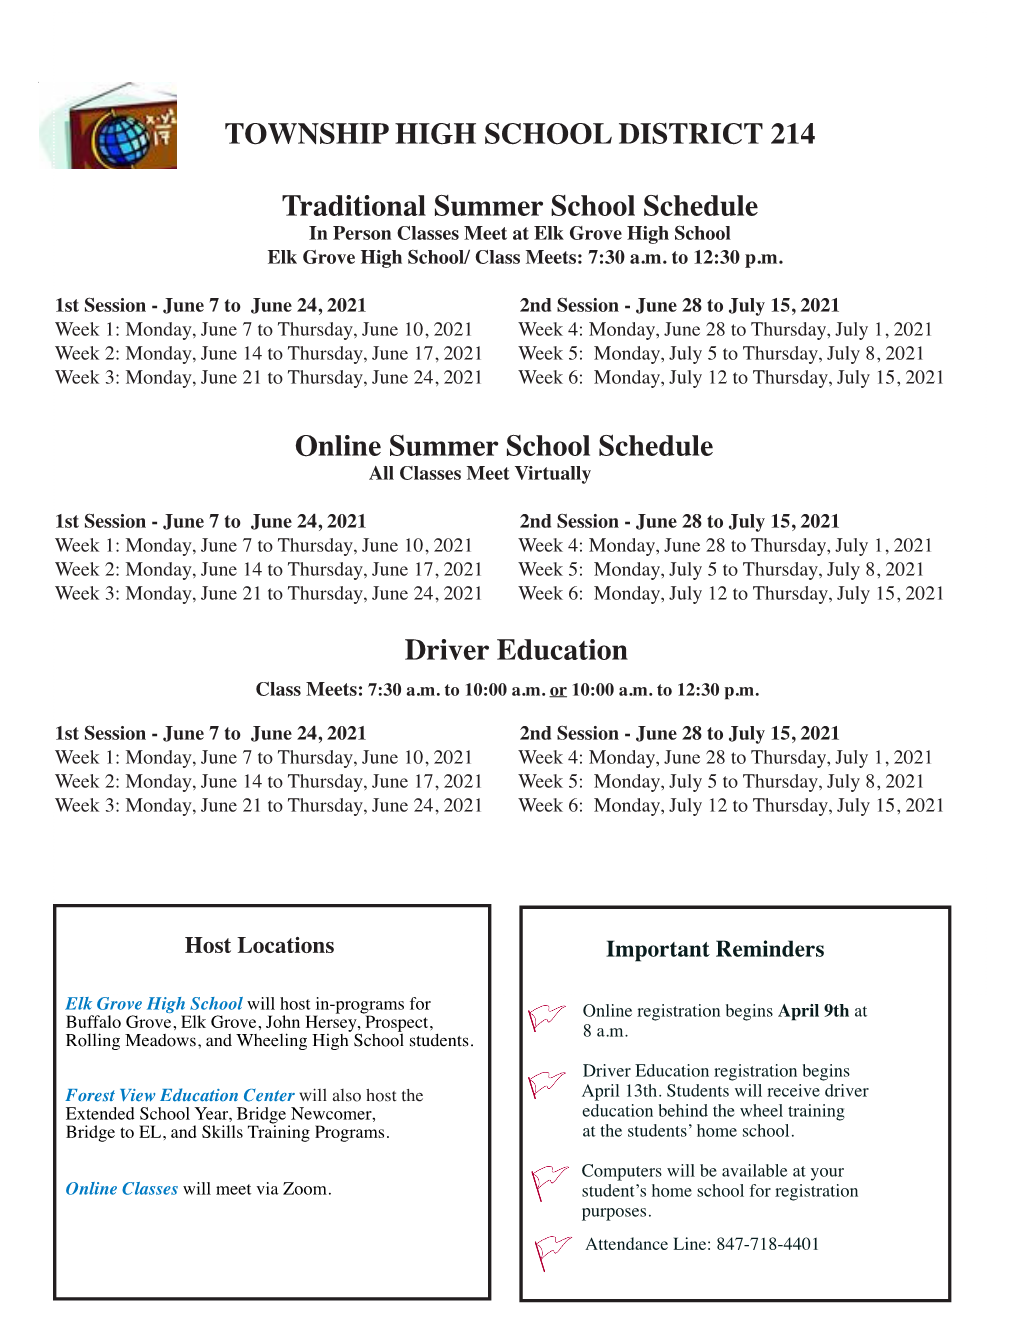 TOWNSHIP HIGH SCHOOL DISTRICT 214 Traditional Summer School Schedule Online Summer School Schedule Driver Education